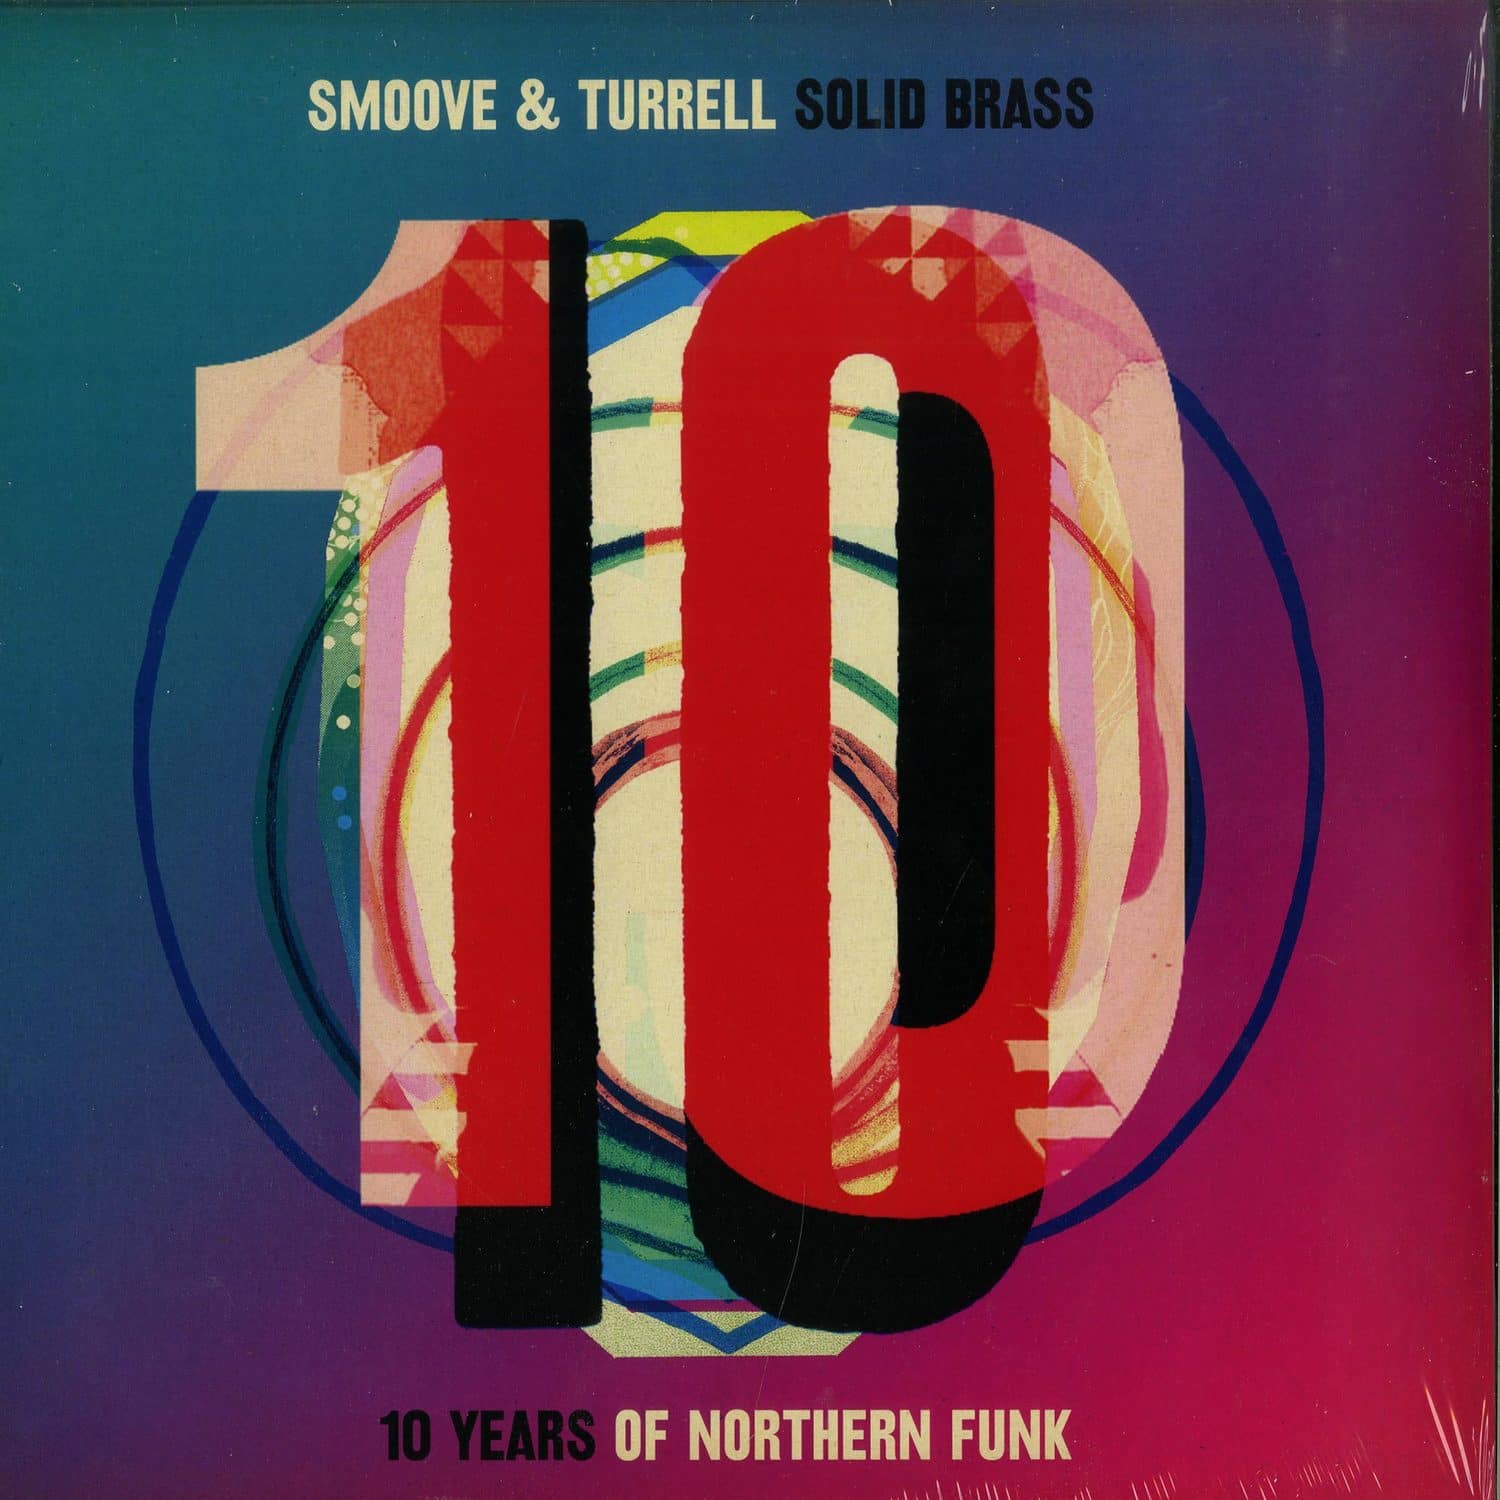 Smoove & Turrell - SOLID BRASS: TEN YEARS OF NORTHERN FUNK 